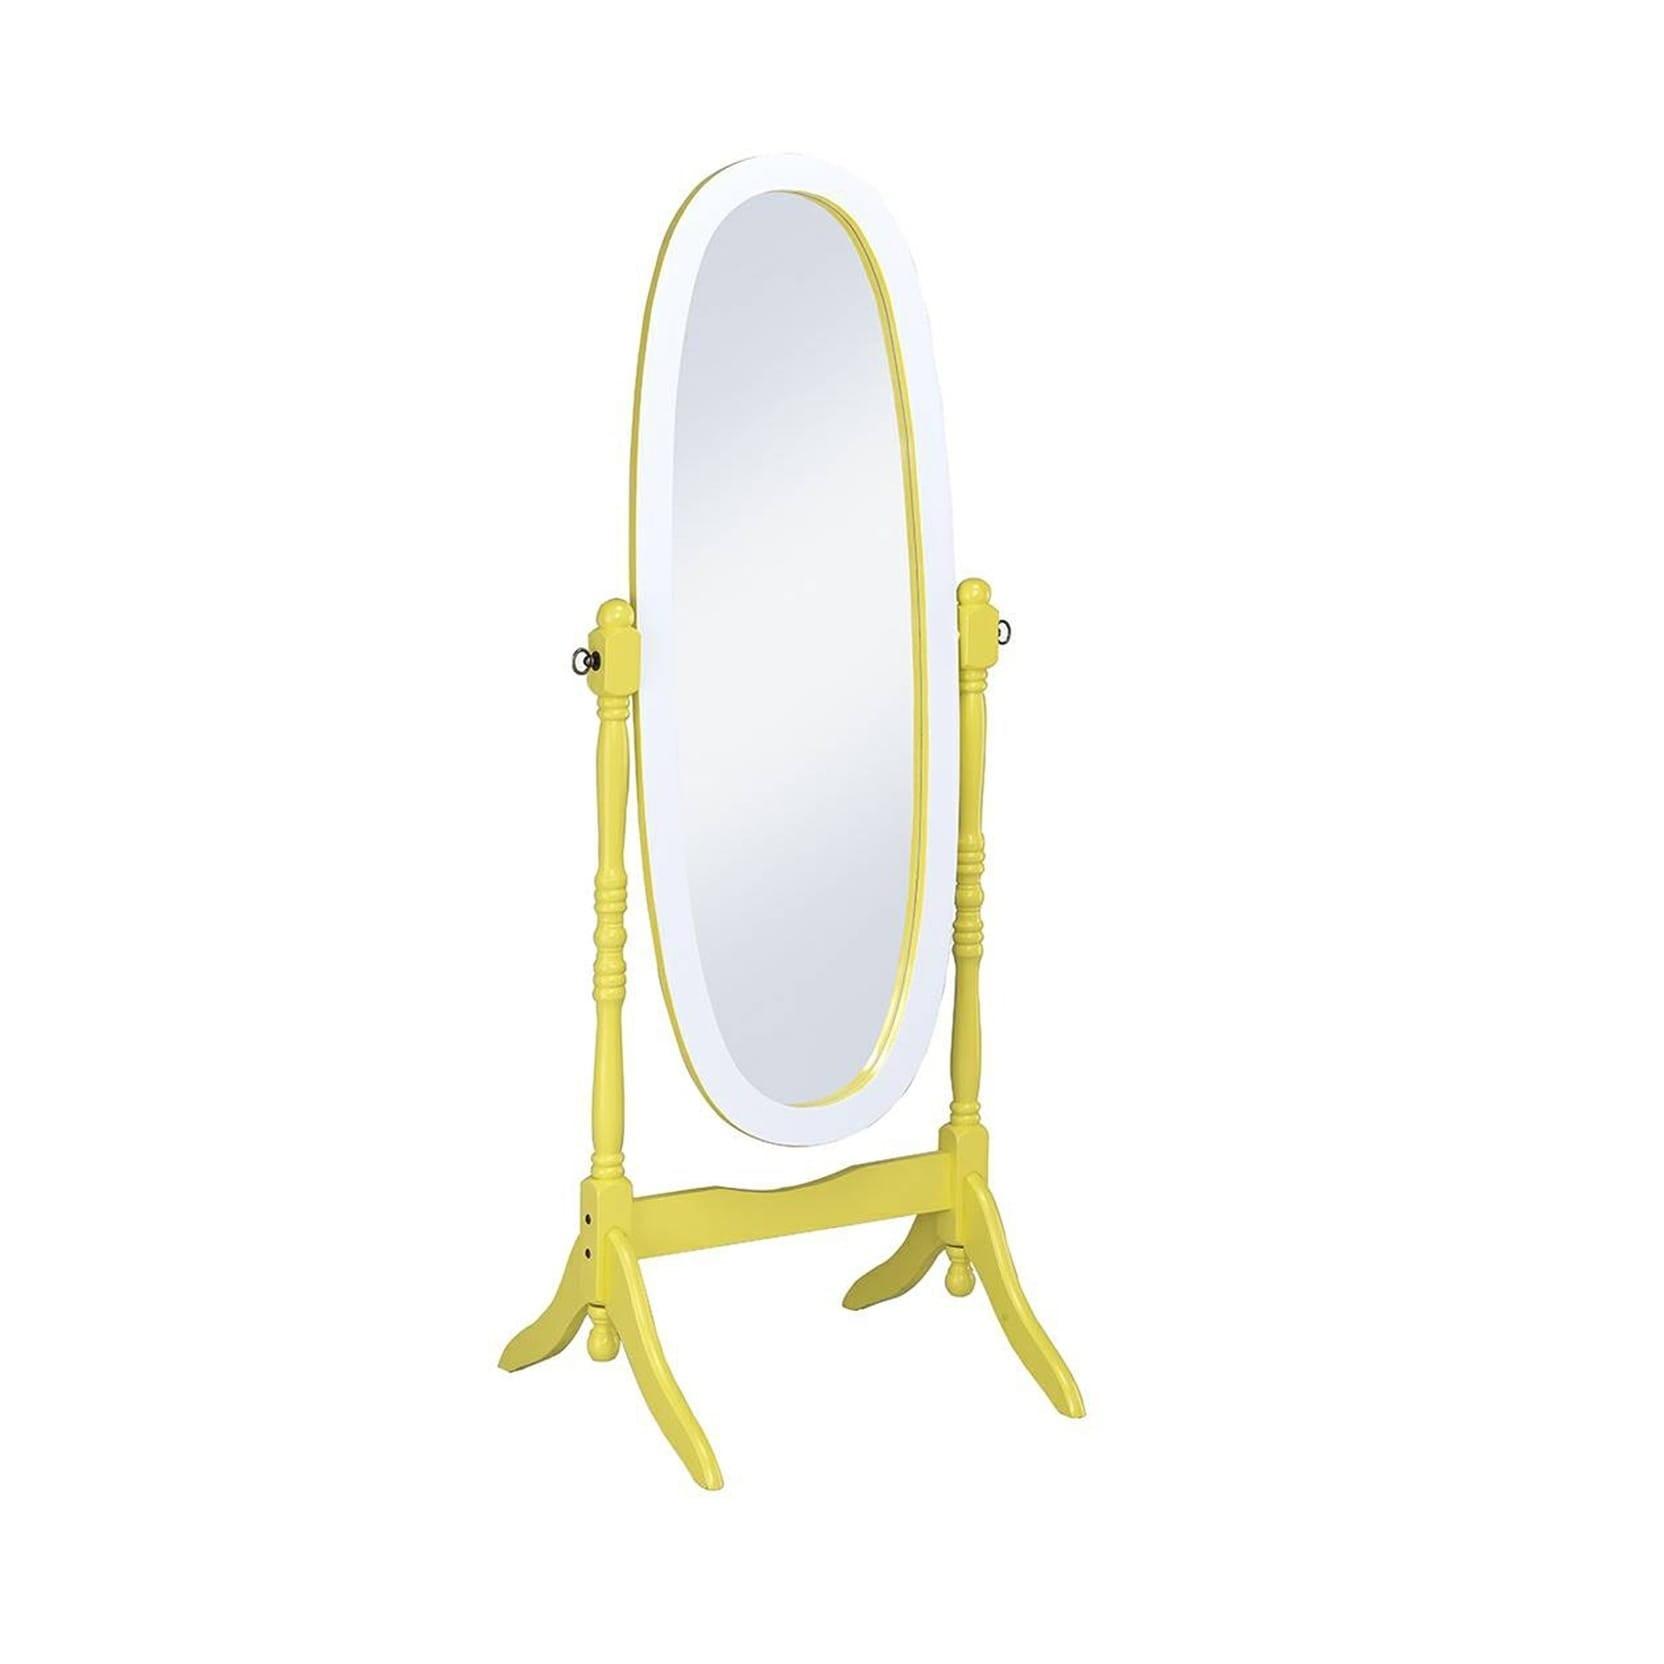 Cheval Full Length Oval Wood Freestanding Mirror with Swivel Design